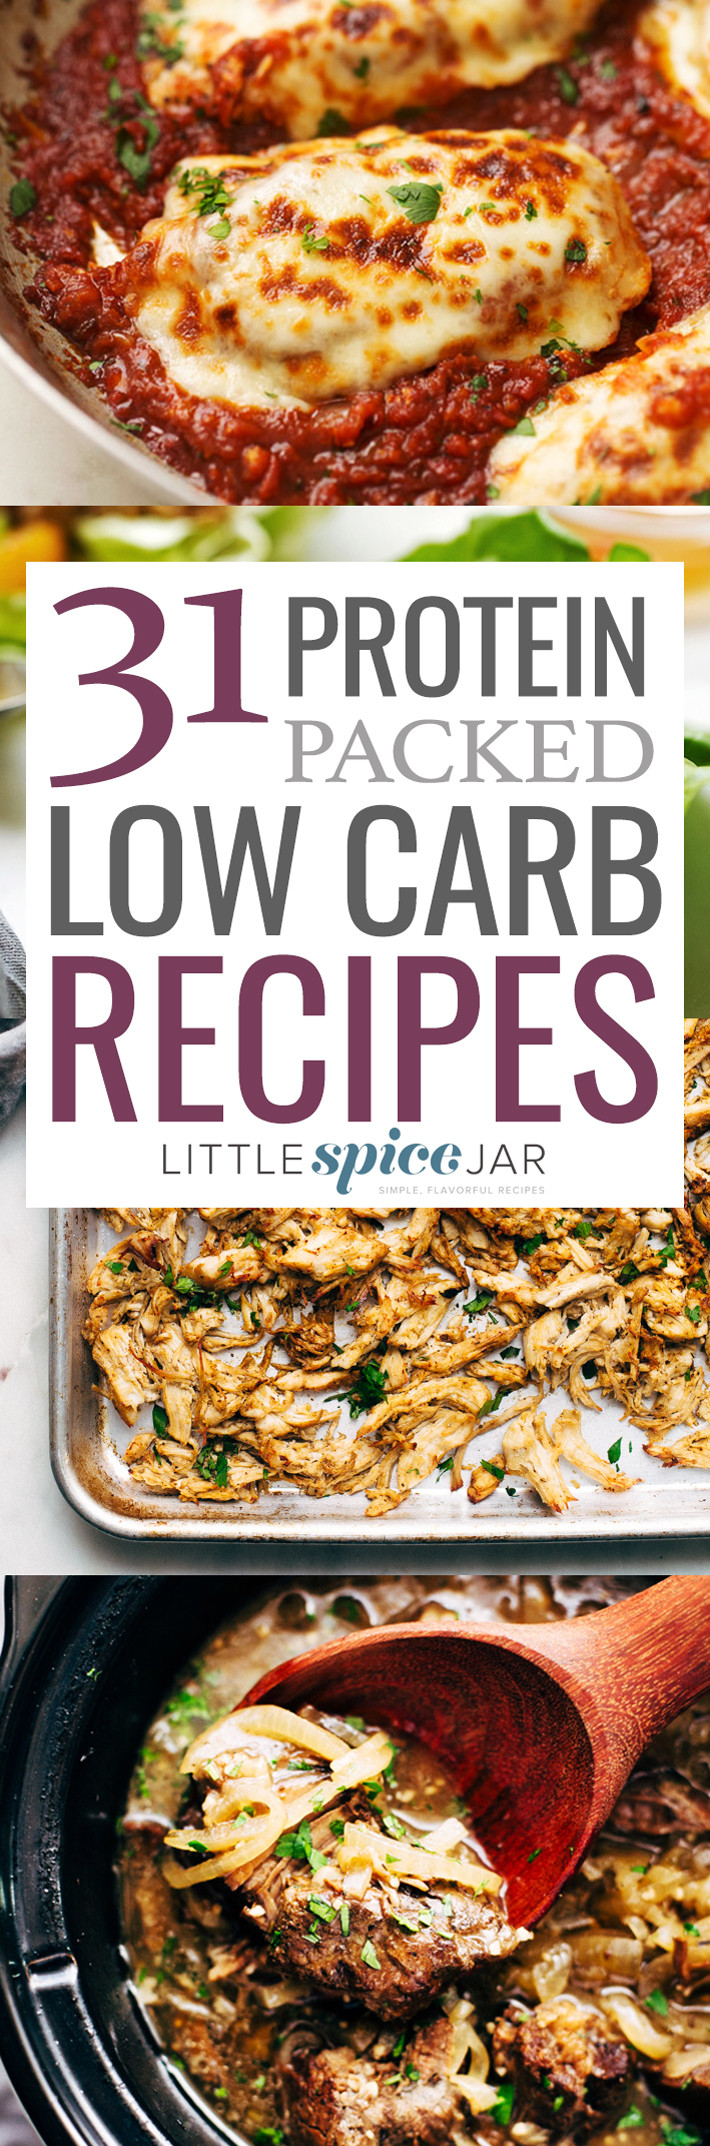 Protein Recipes Low Carb
 31 Protein Packed Low Carb Recipes